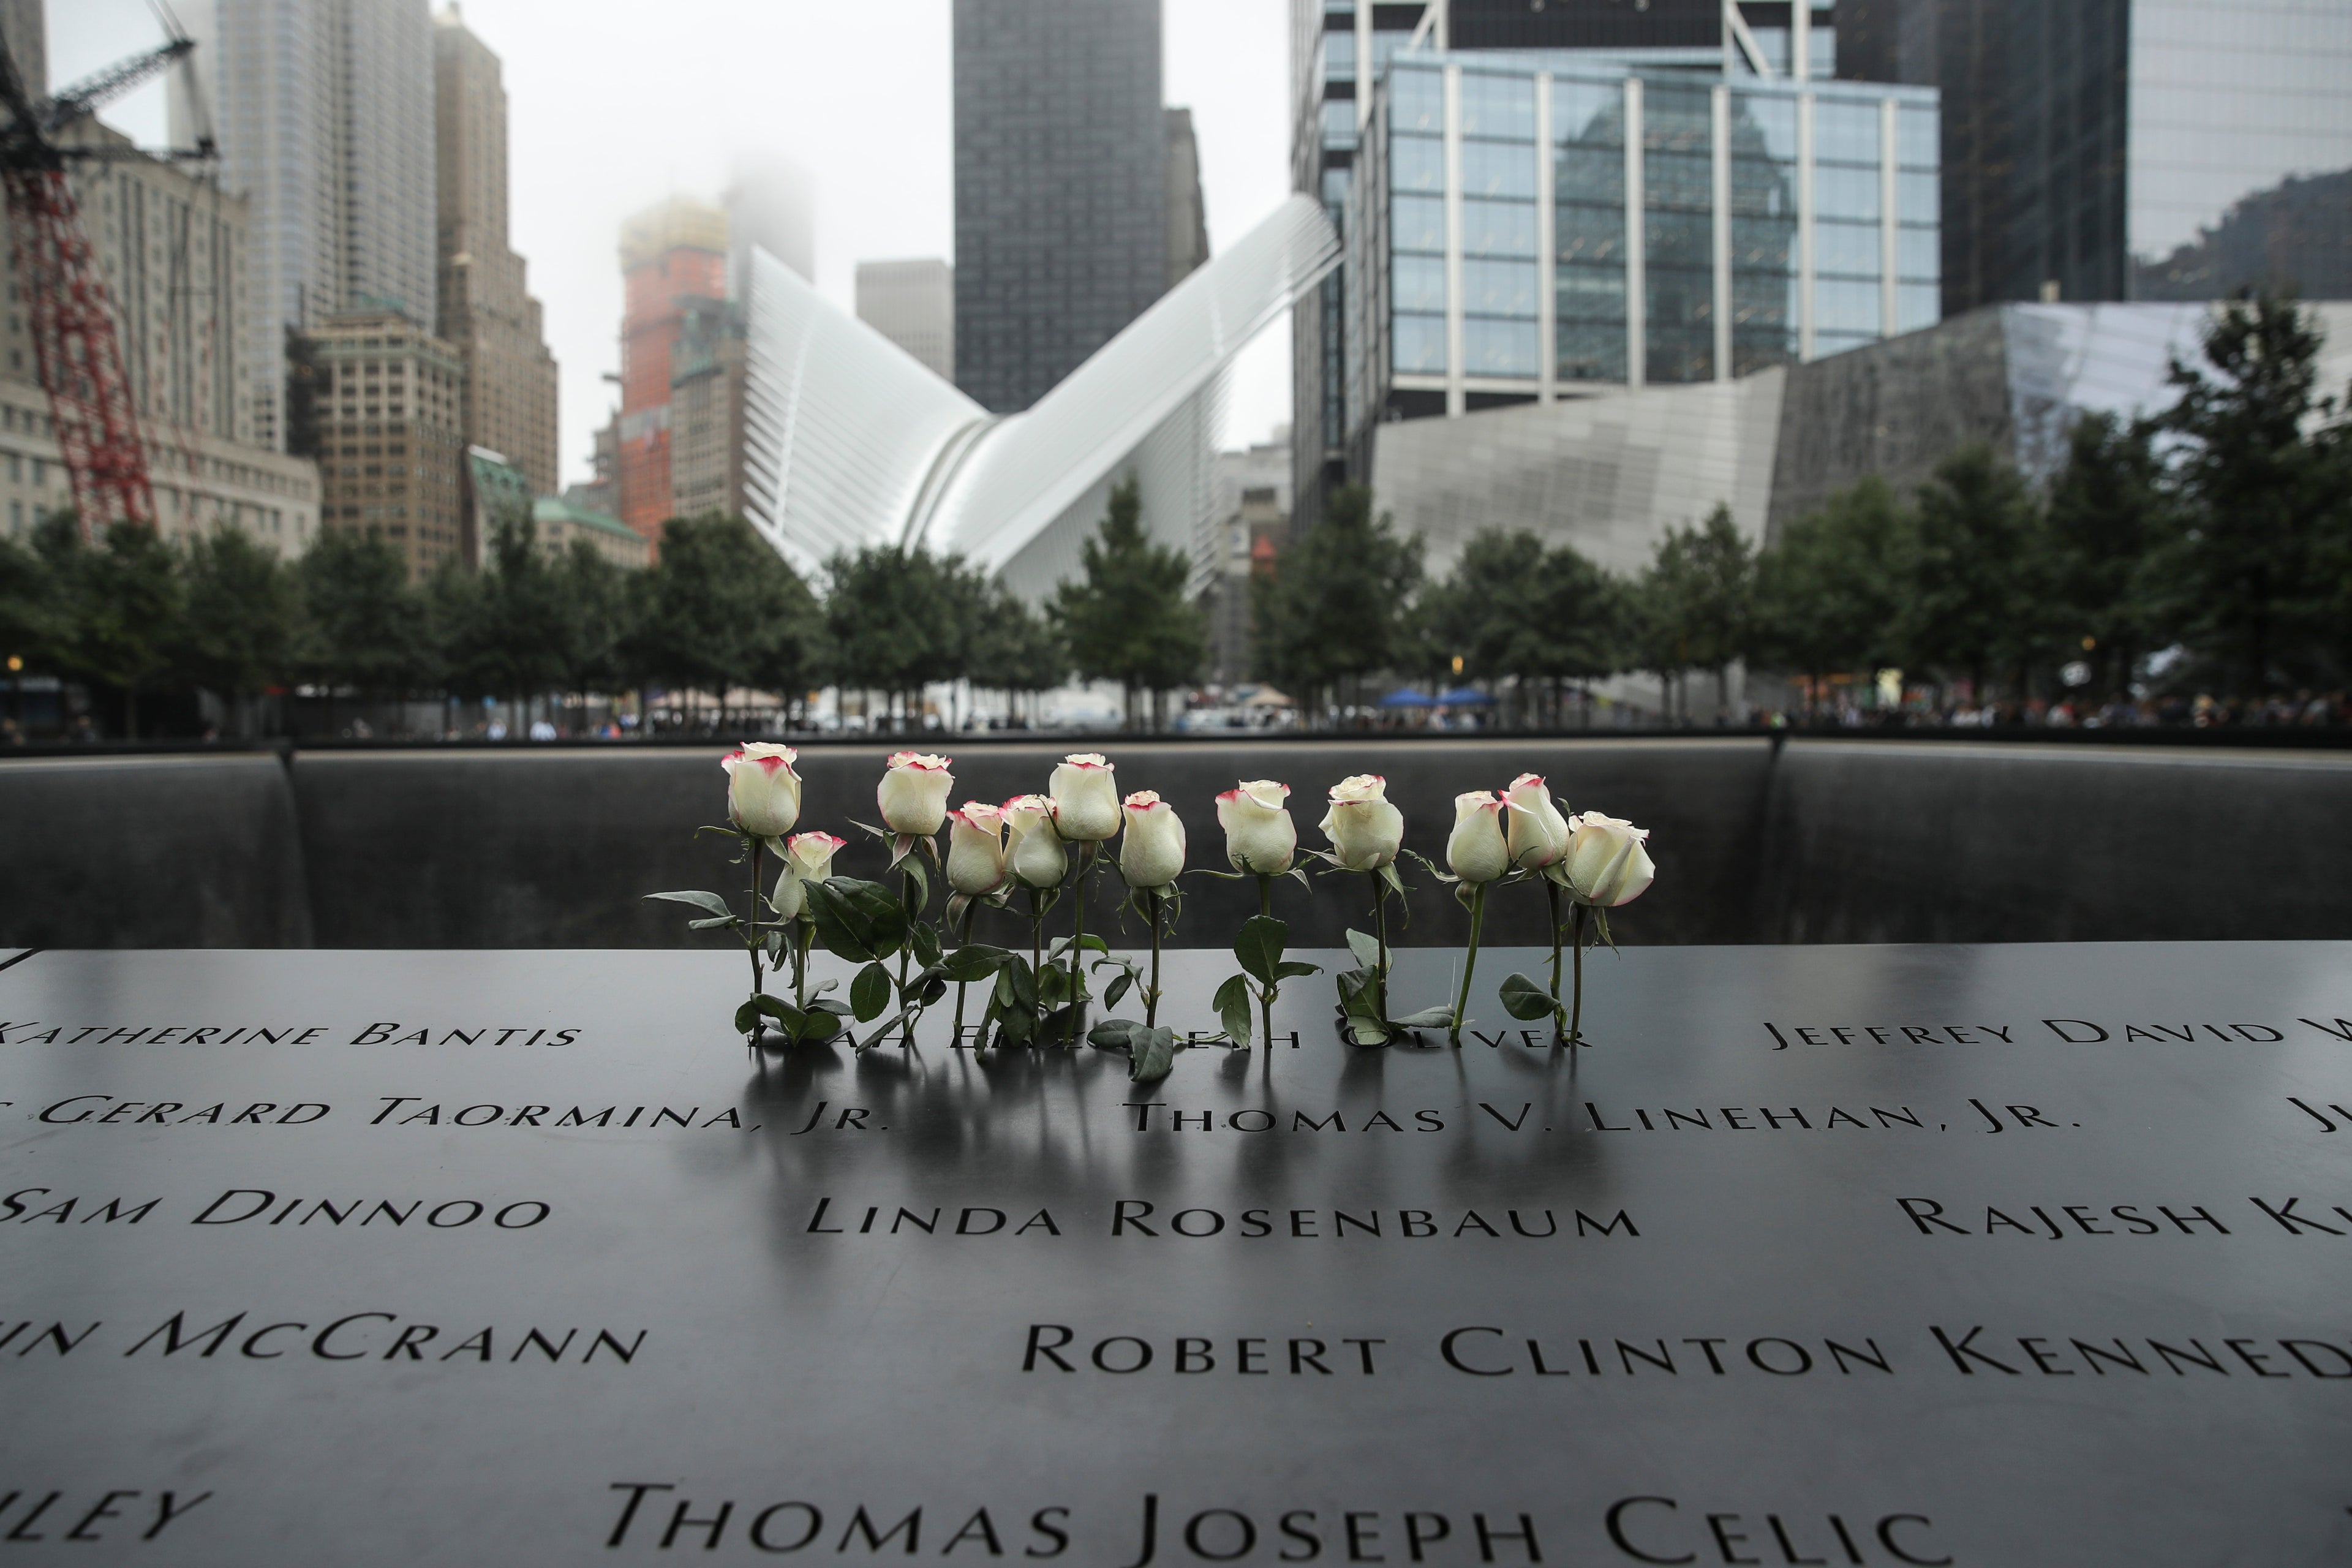 Anniversary Of September 11th Attacks On The U.S. Commemorated At World Trade Center Site